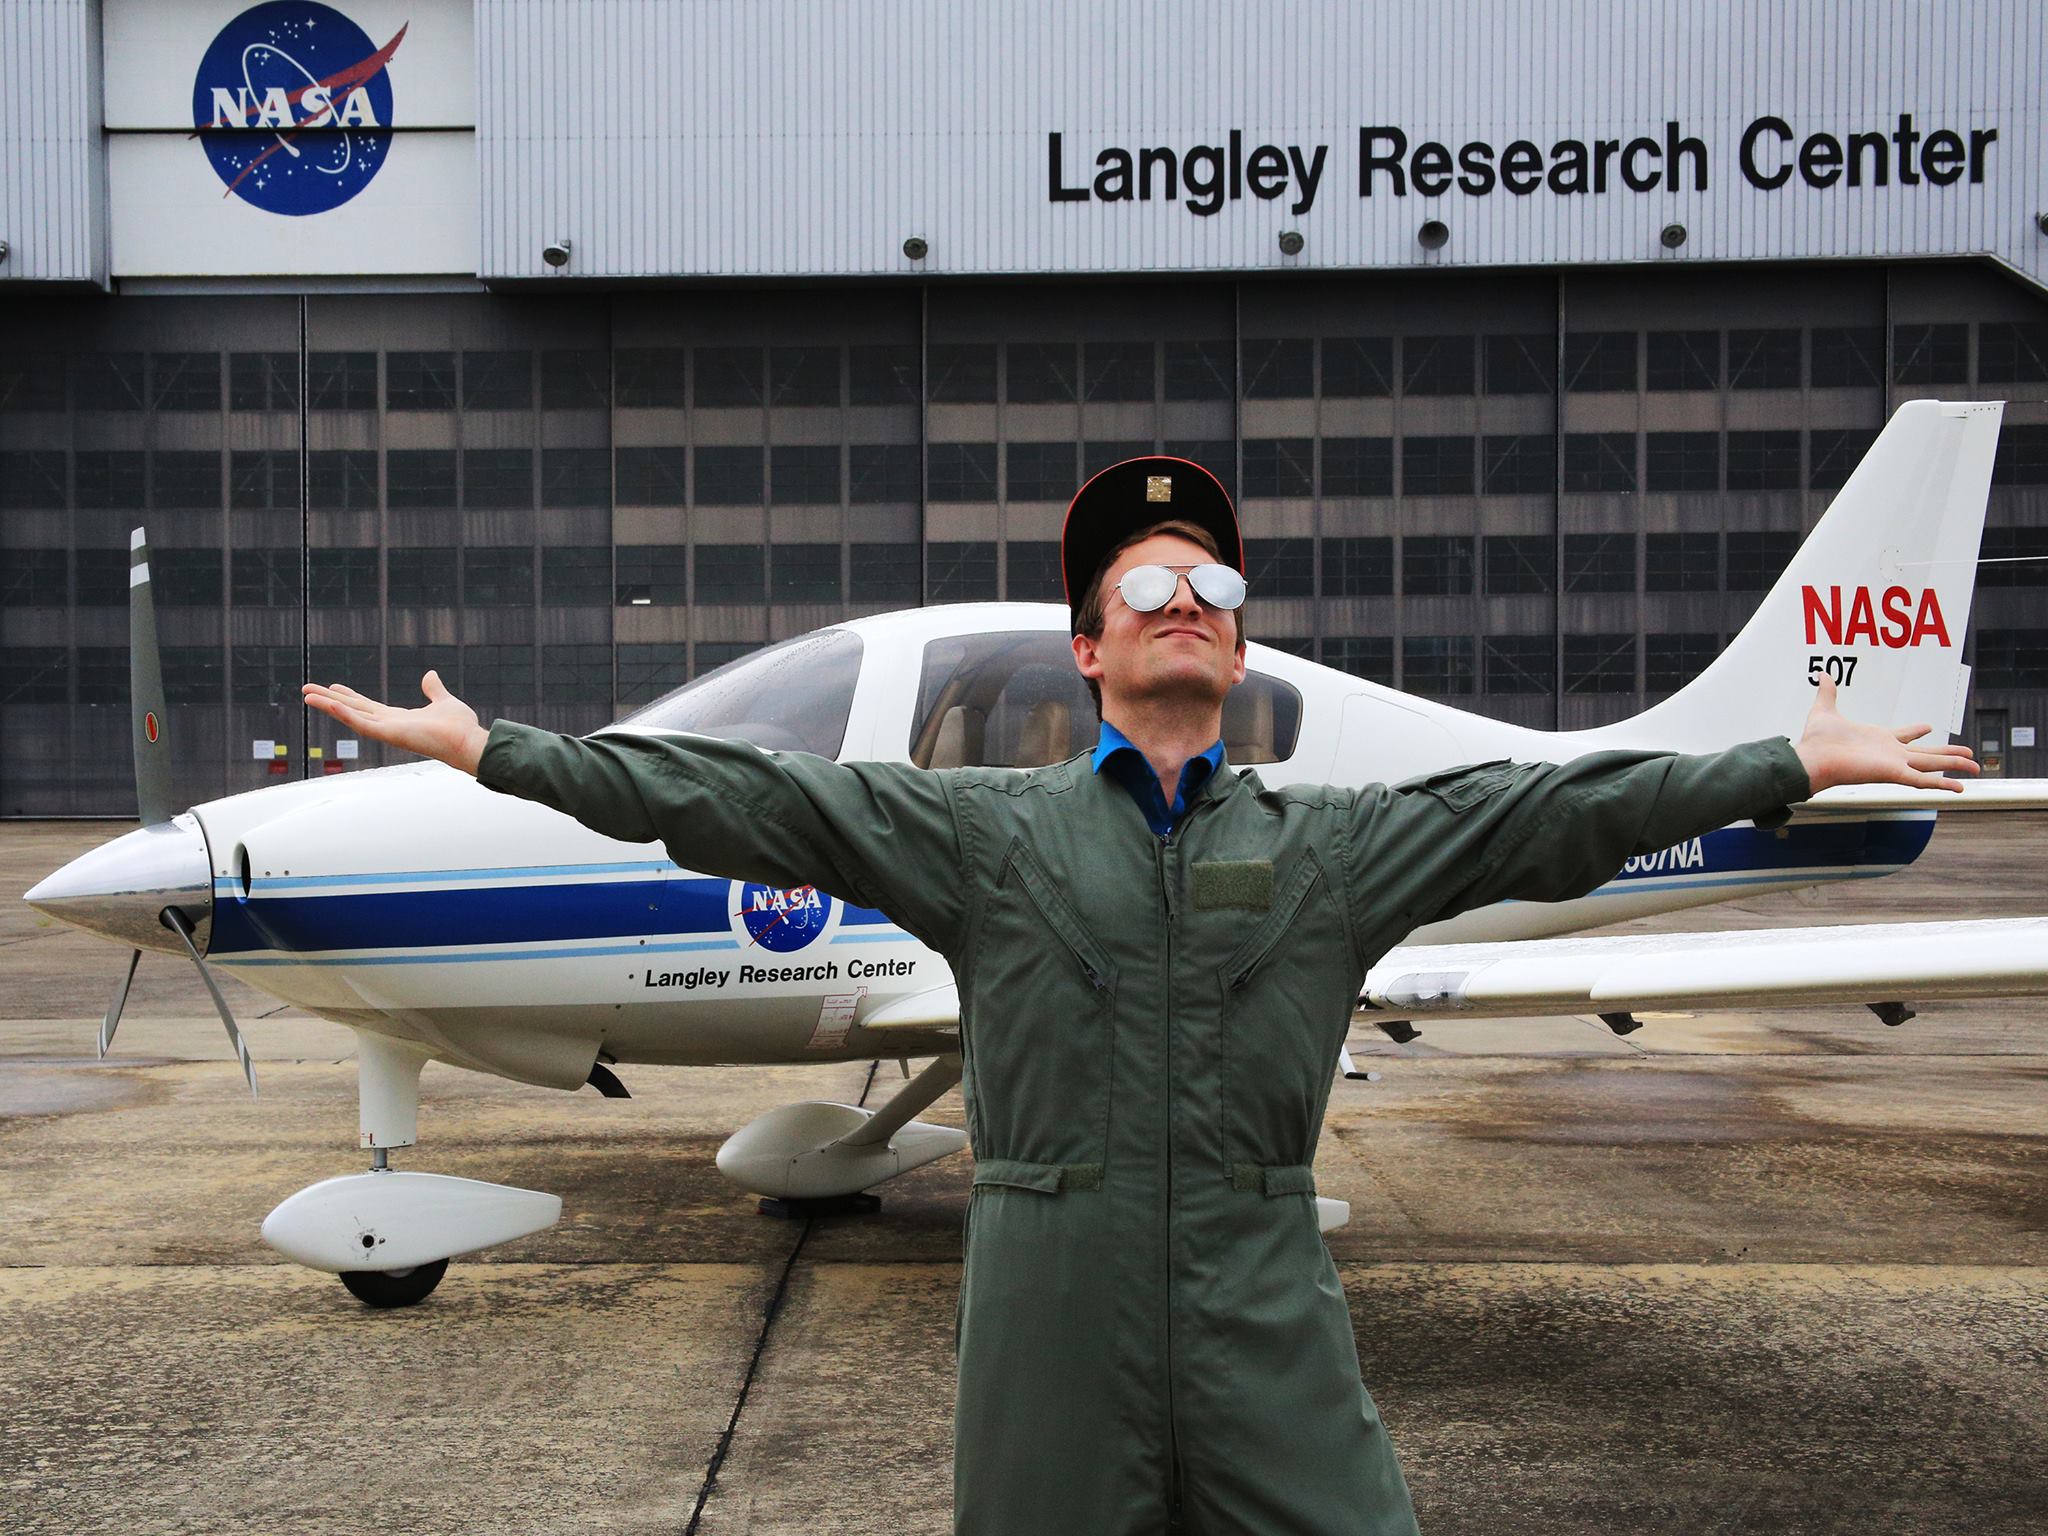 Kenneth Smith is pictured in a flight suit in front of NASA Langley's hangar.